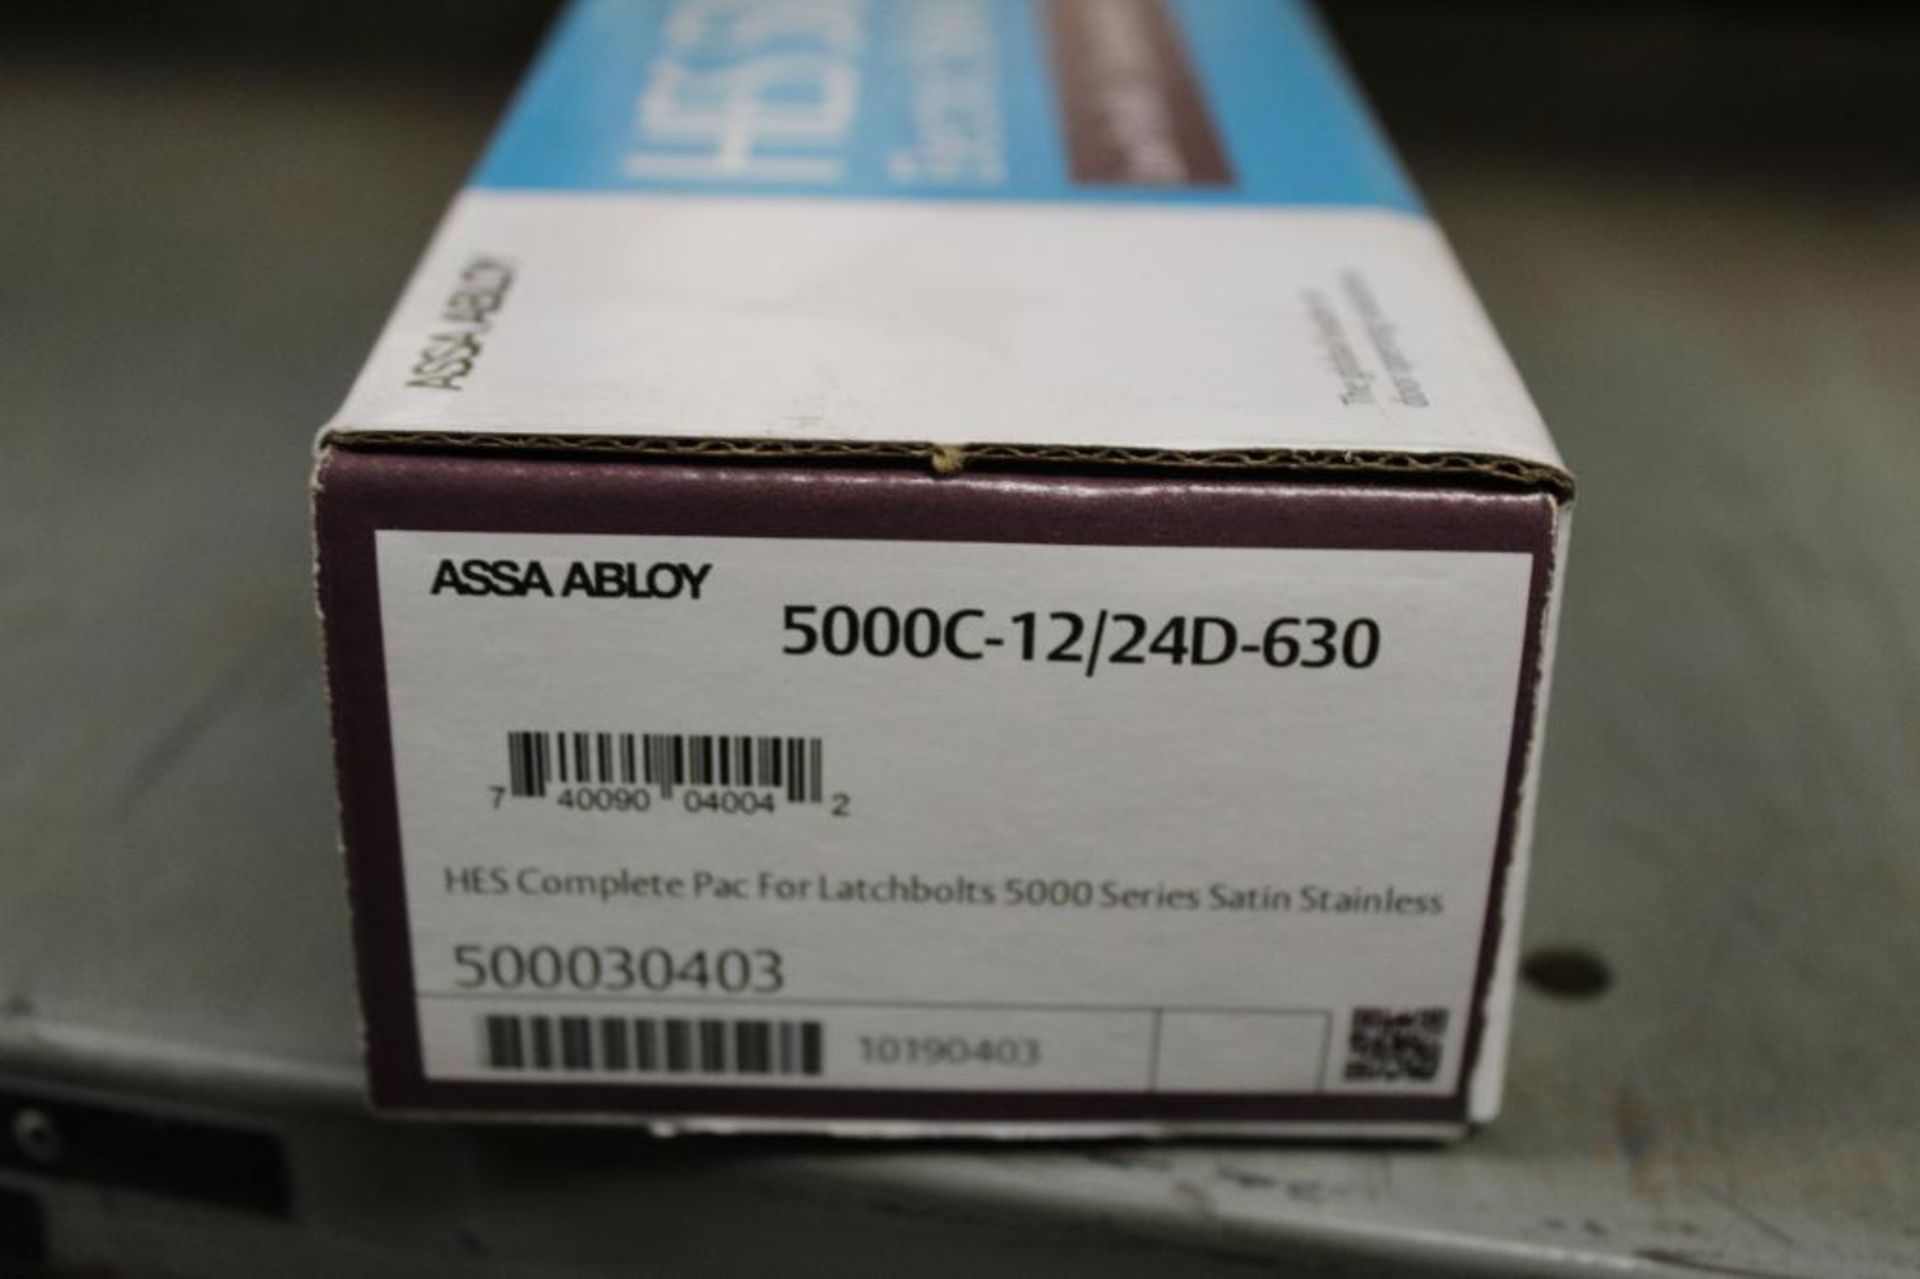 Lot of Assa Abloy HES Electric Strike Body 1006 Series &HES Complete Pac for Latchbolts 5000 Series - Image 3 of 15